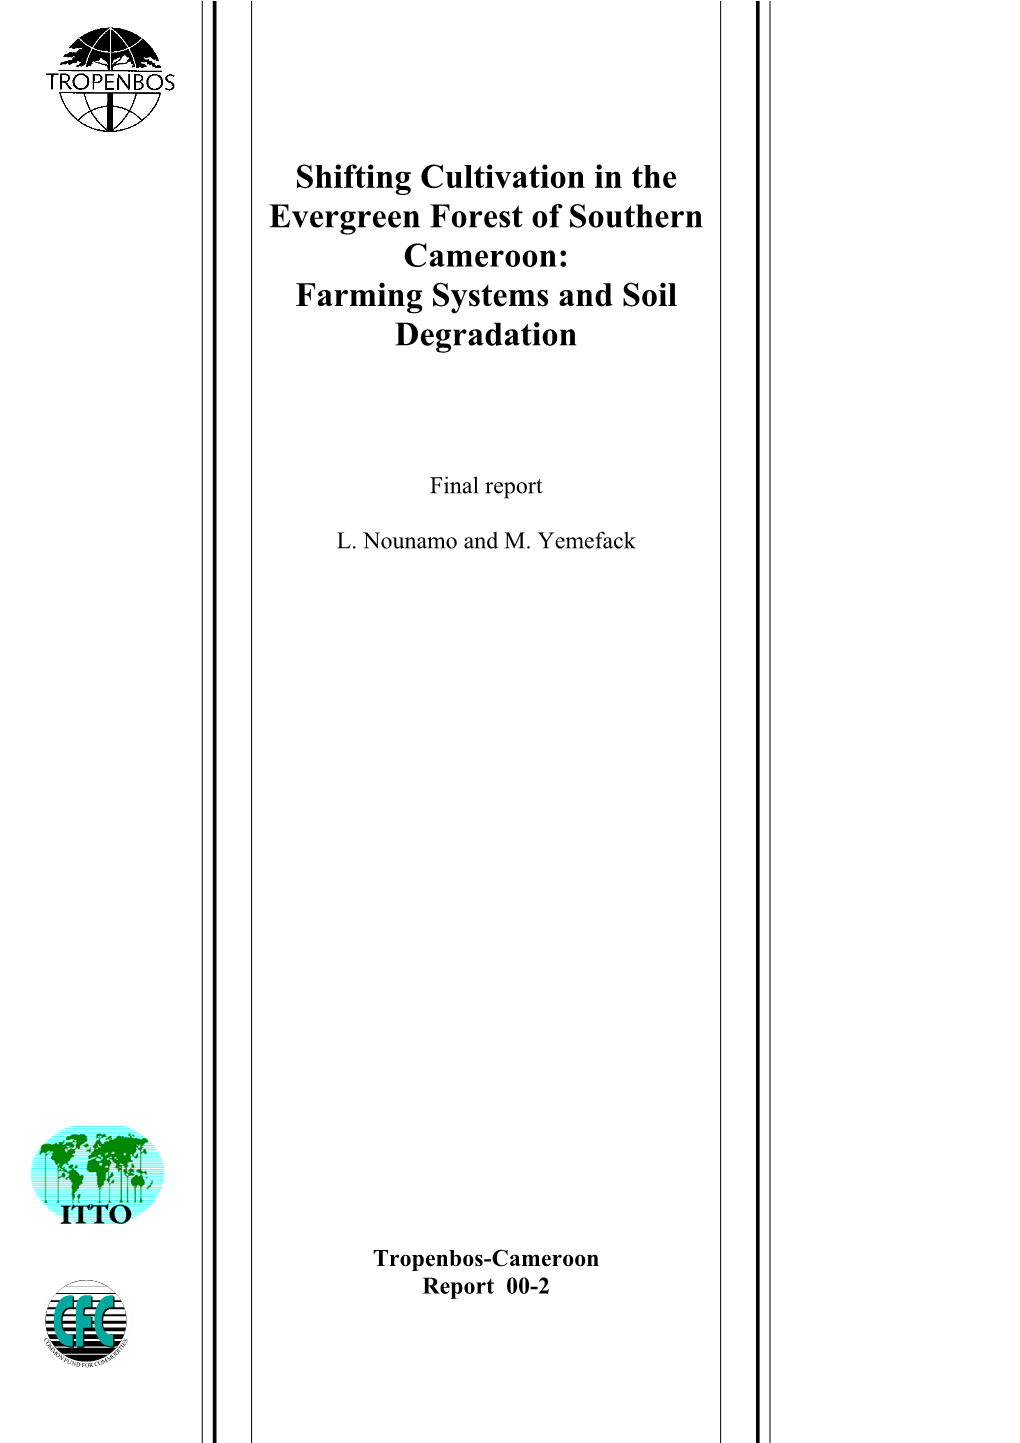 Shifting Cultivation in the Evergreen Forest of Southern Cameroon: Farming Systems and Soil Degradation